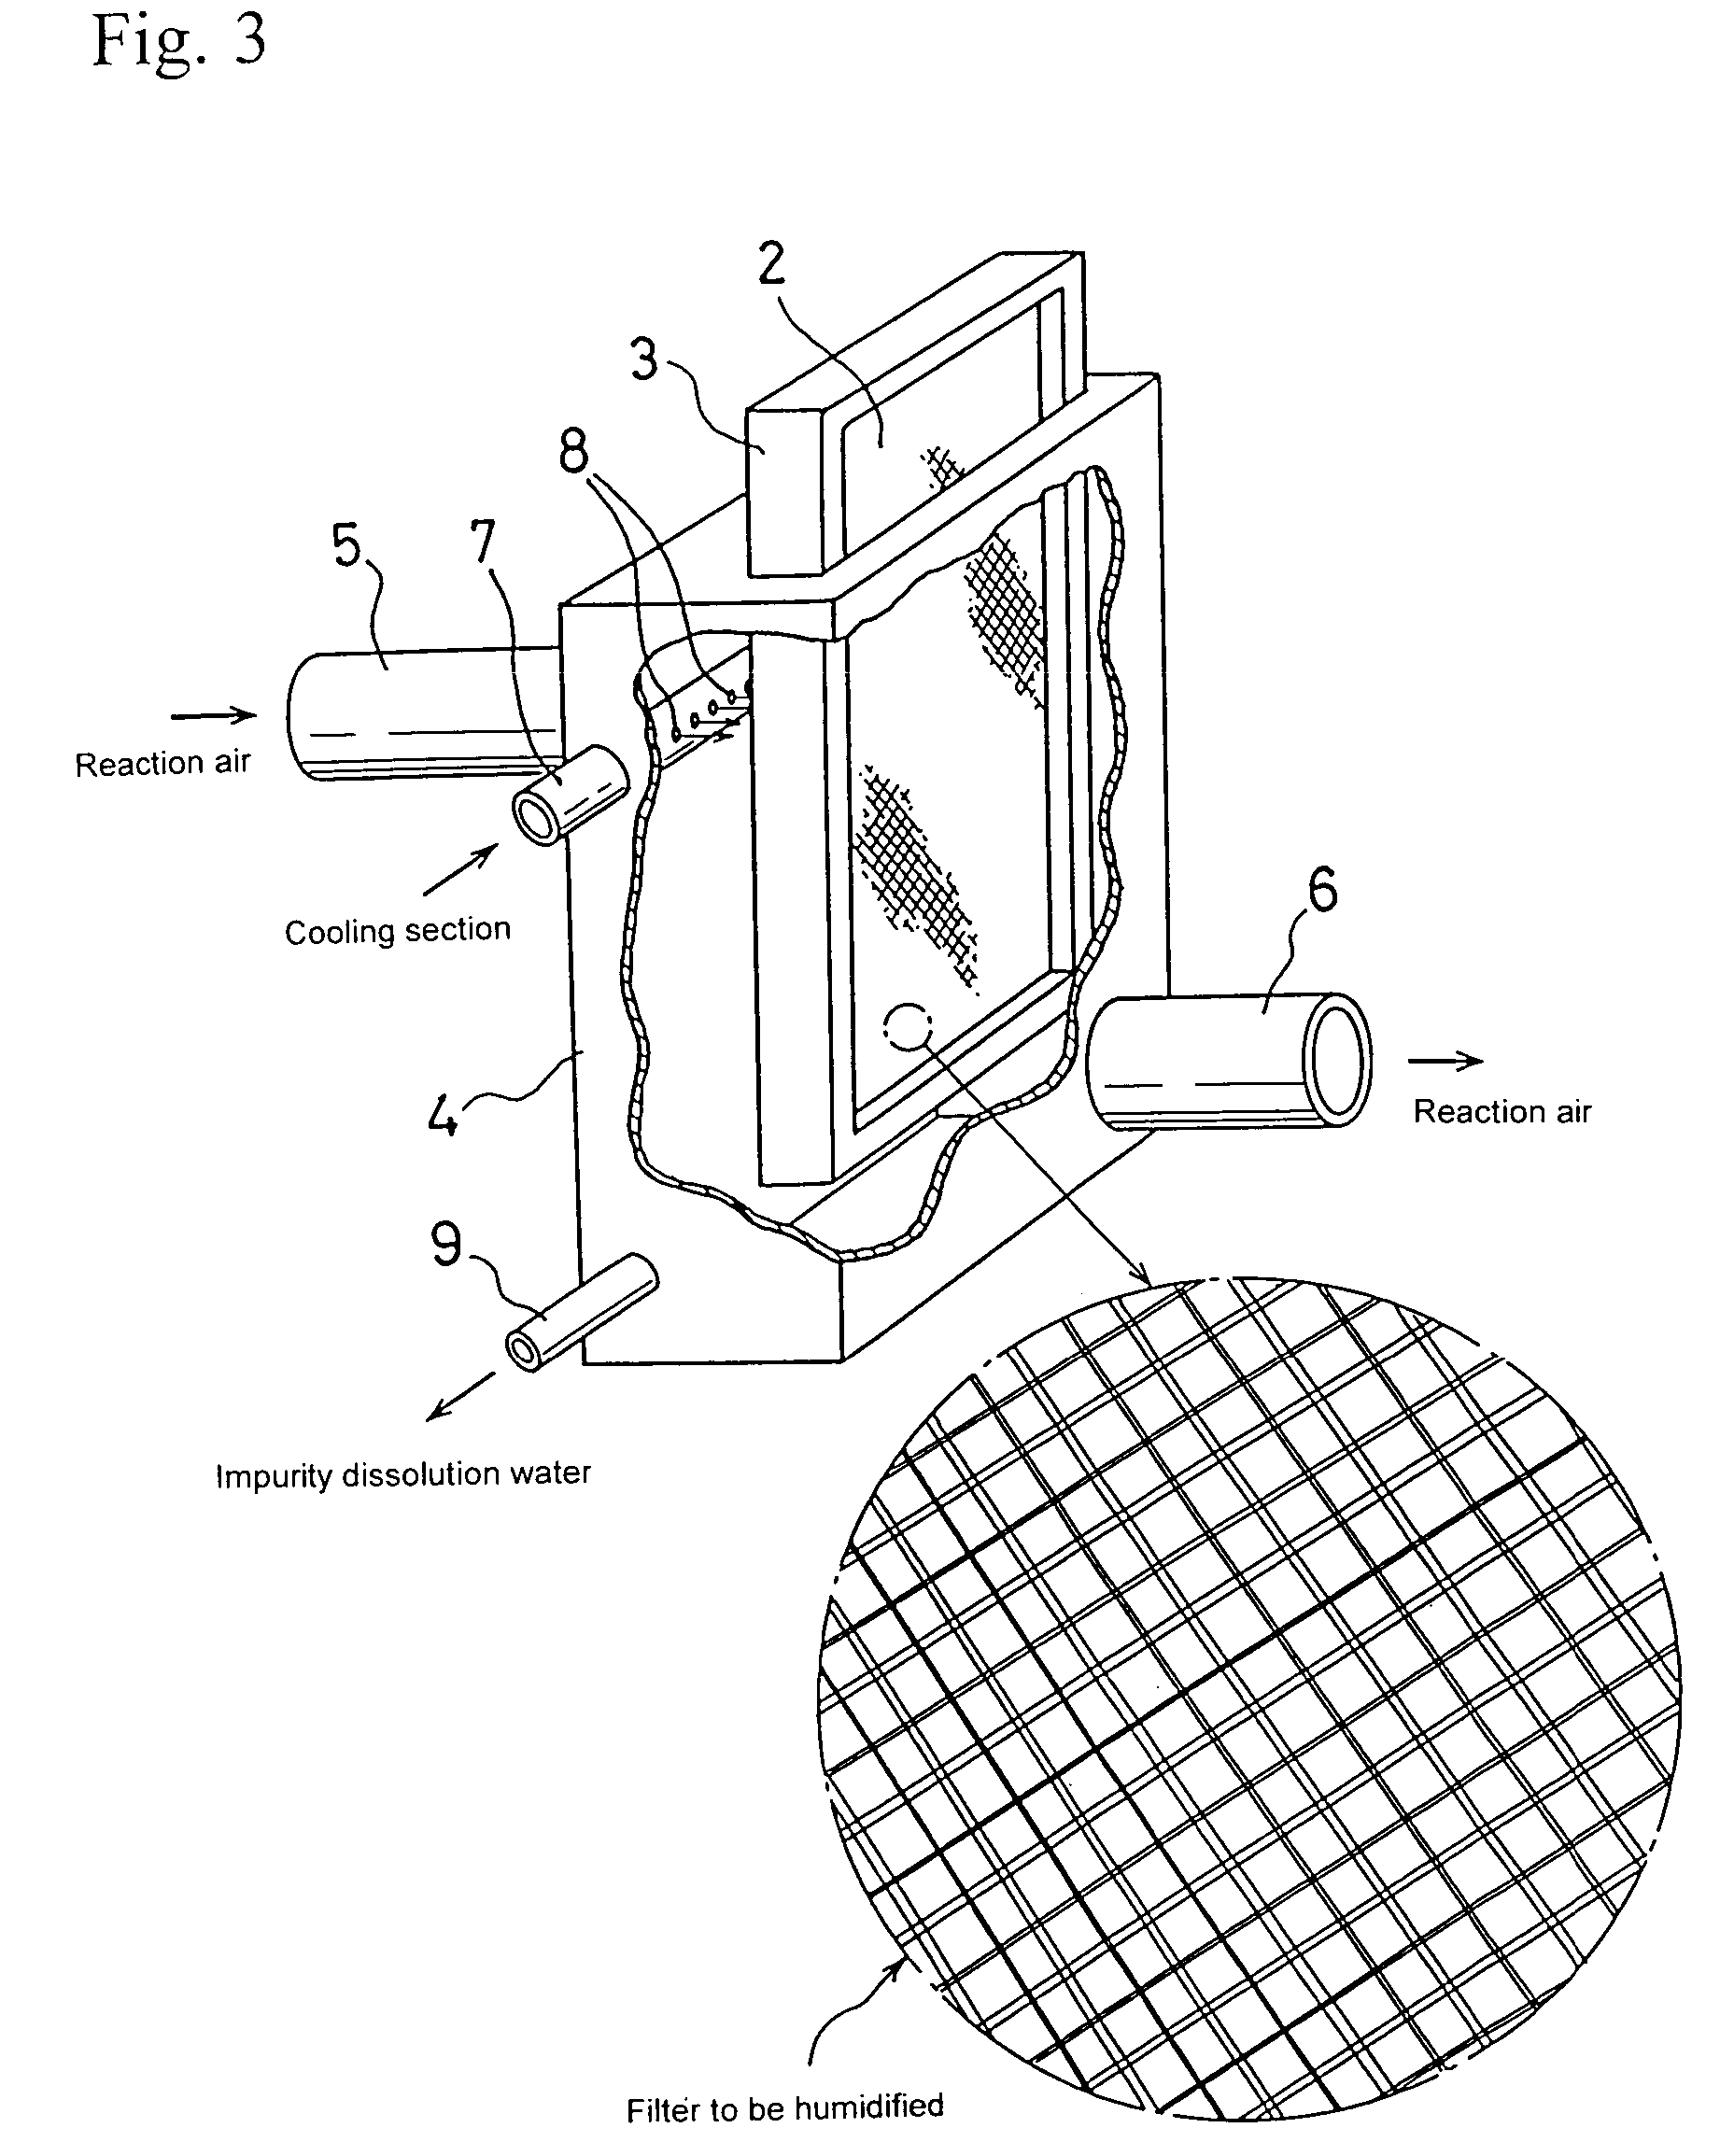 Fuel cell power generating system